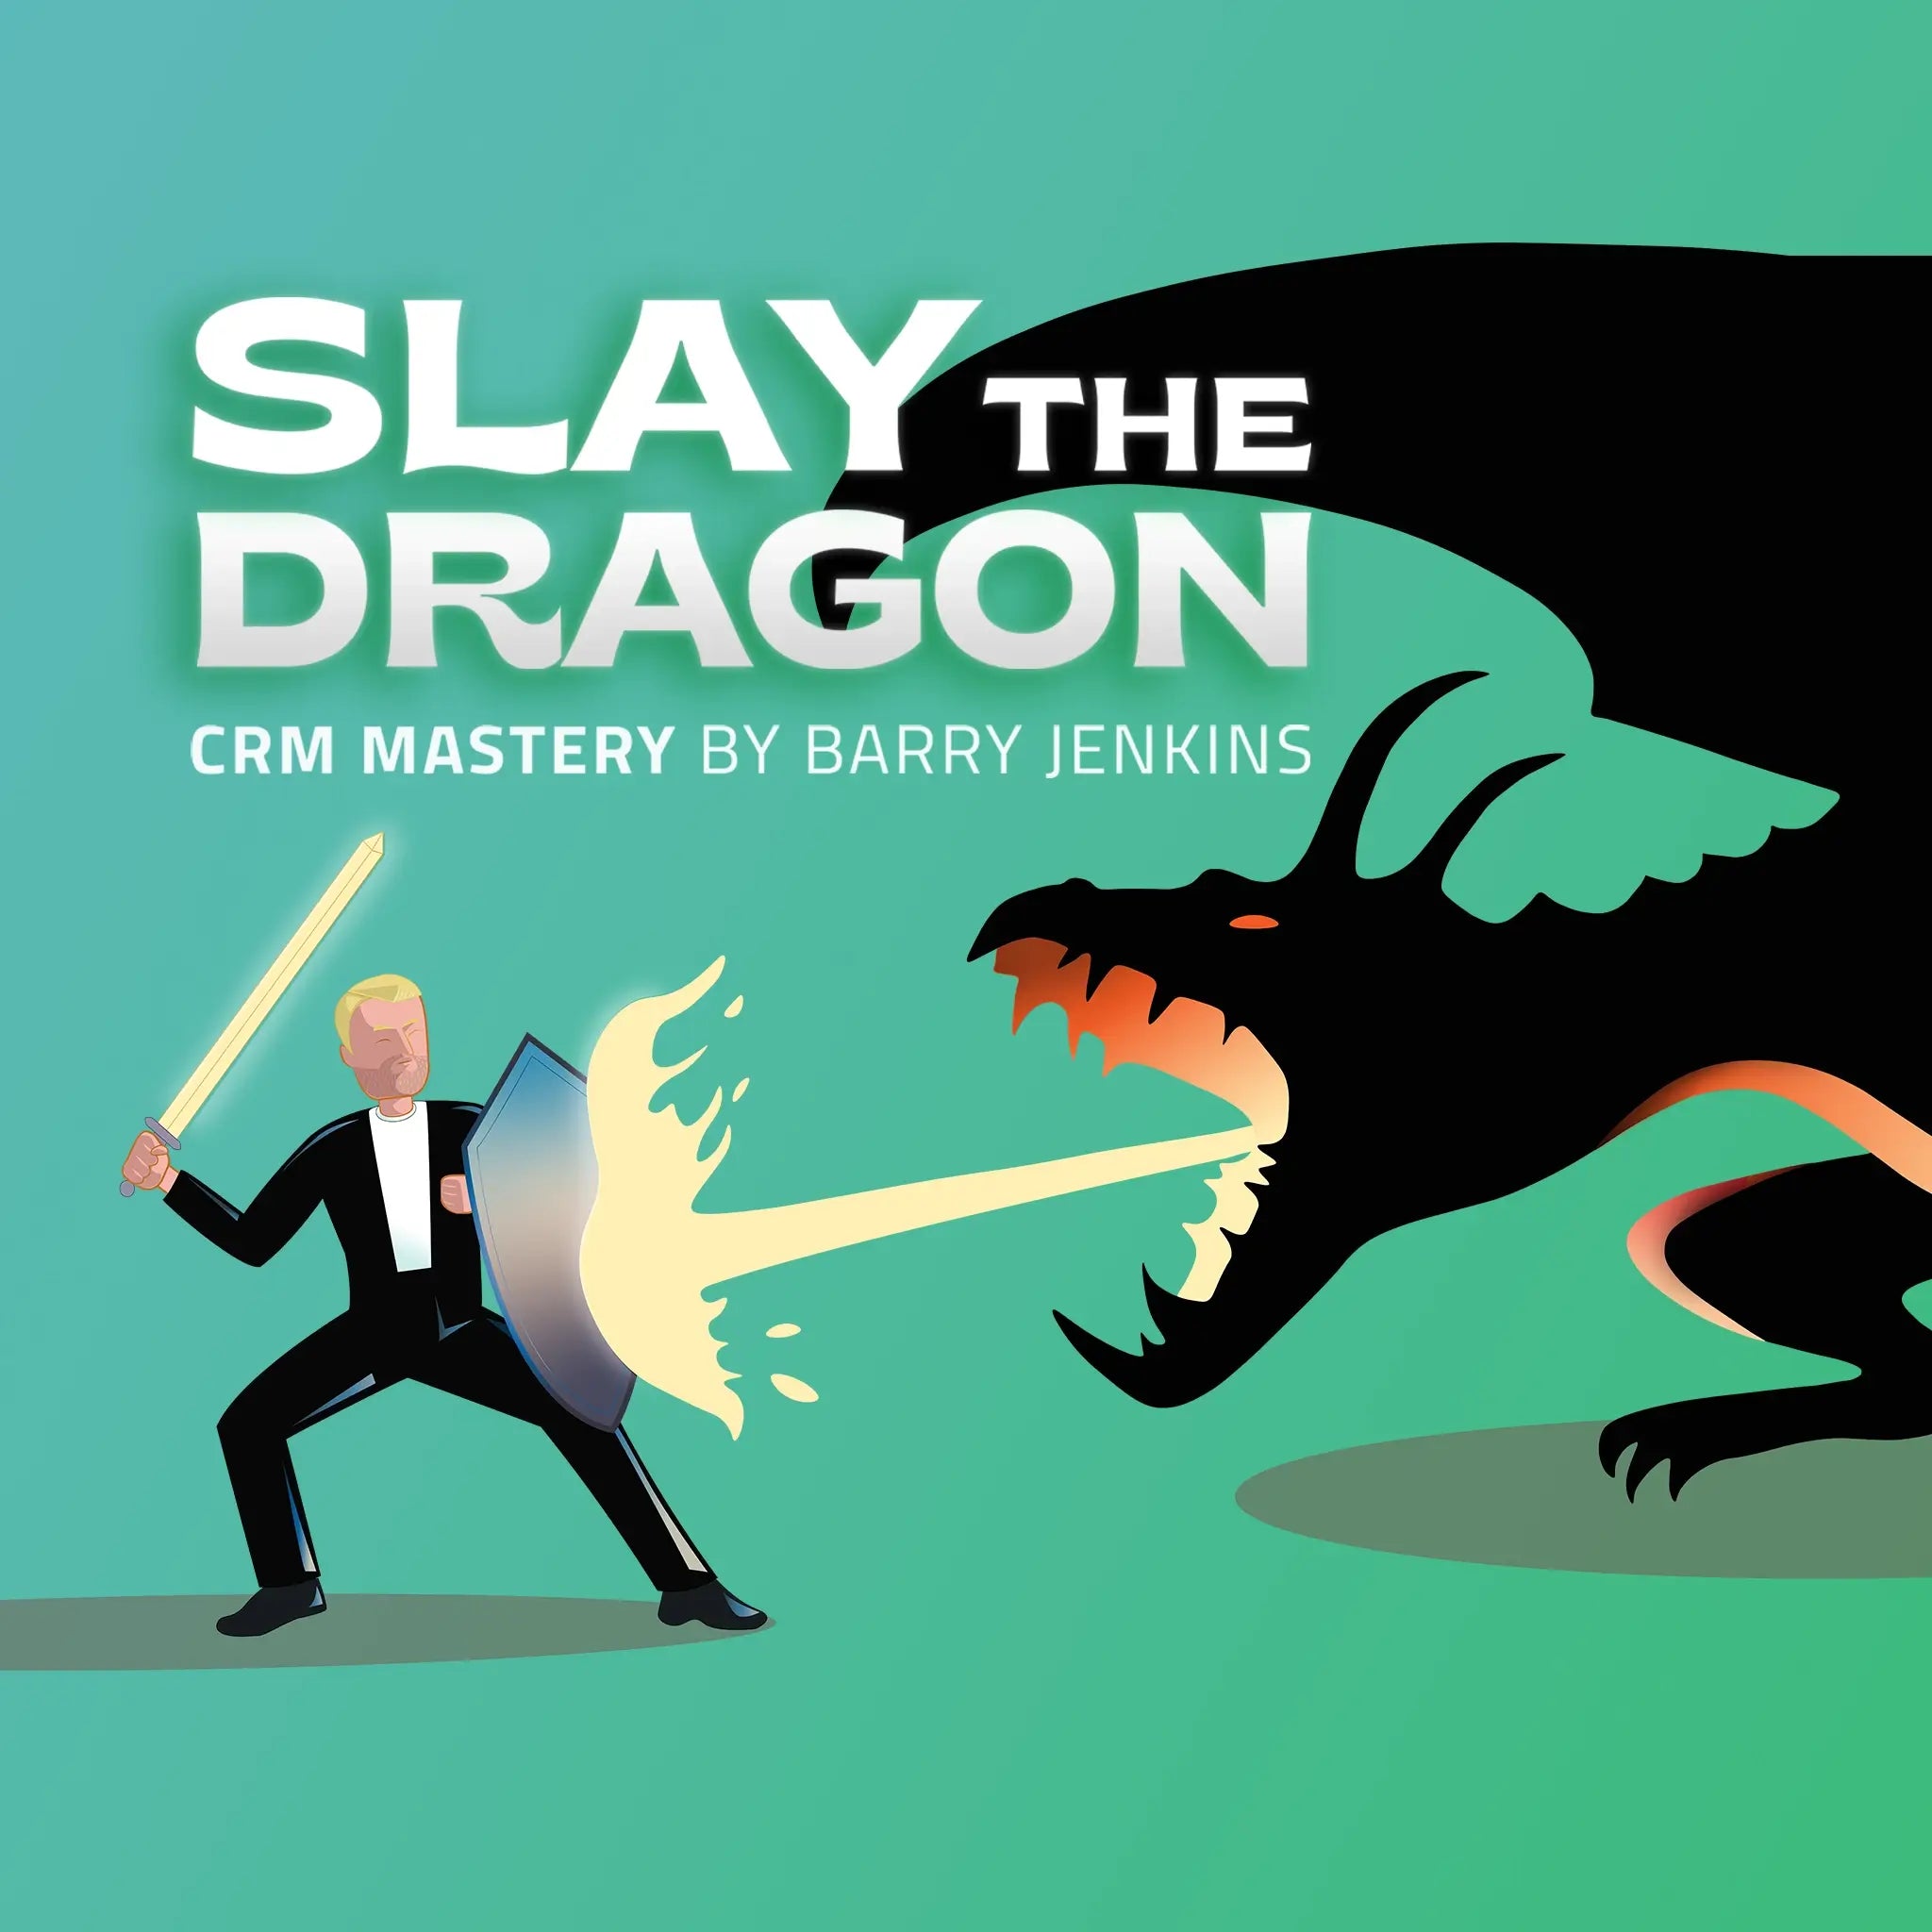 slay the dragon crm mastery course for real estate agents